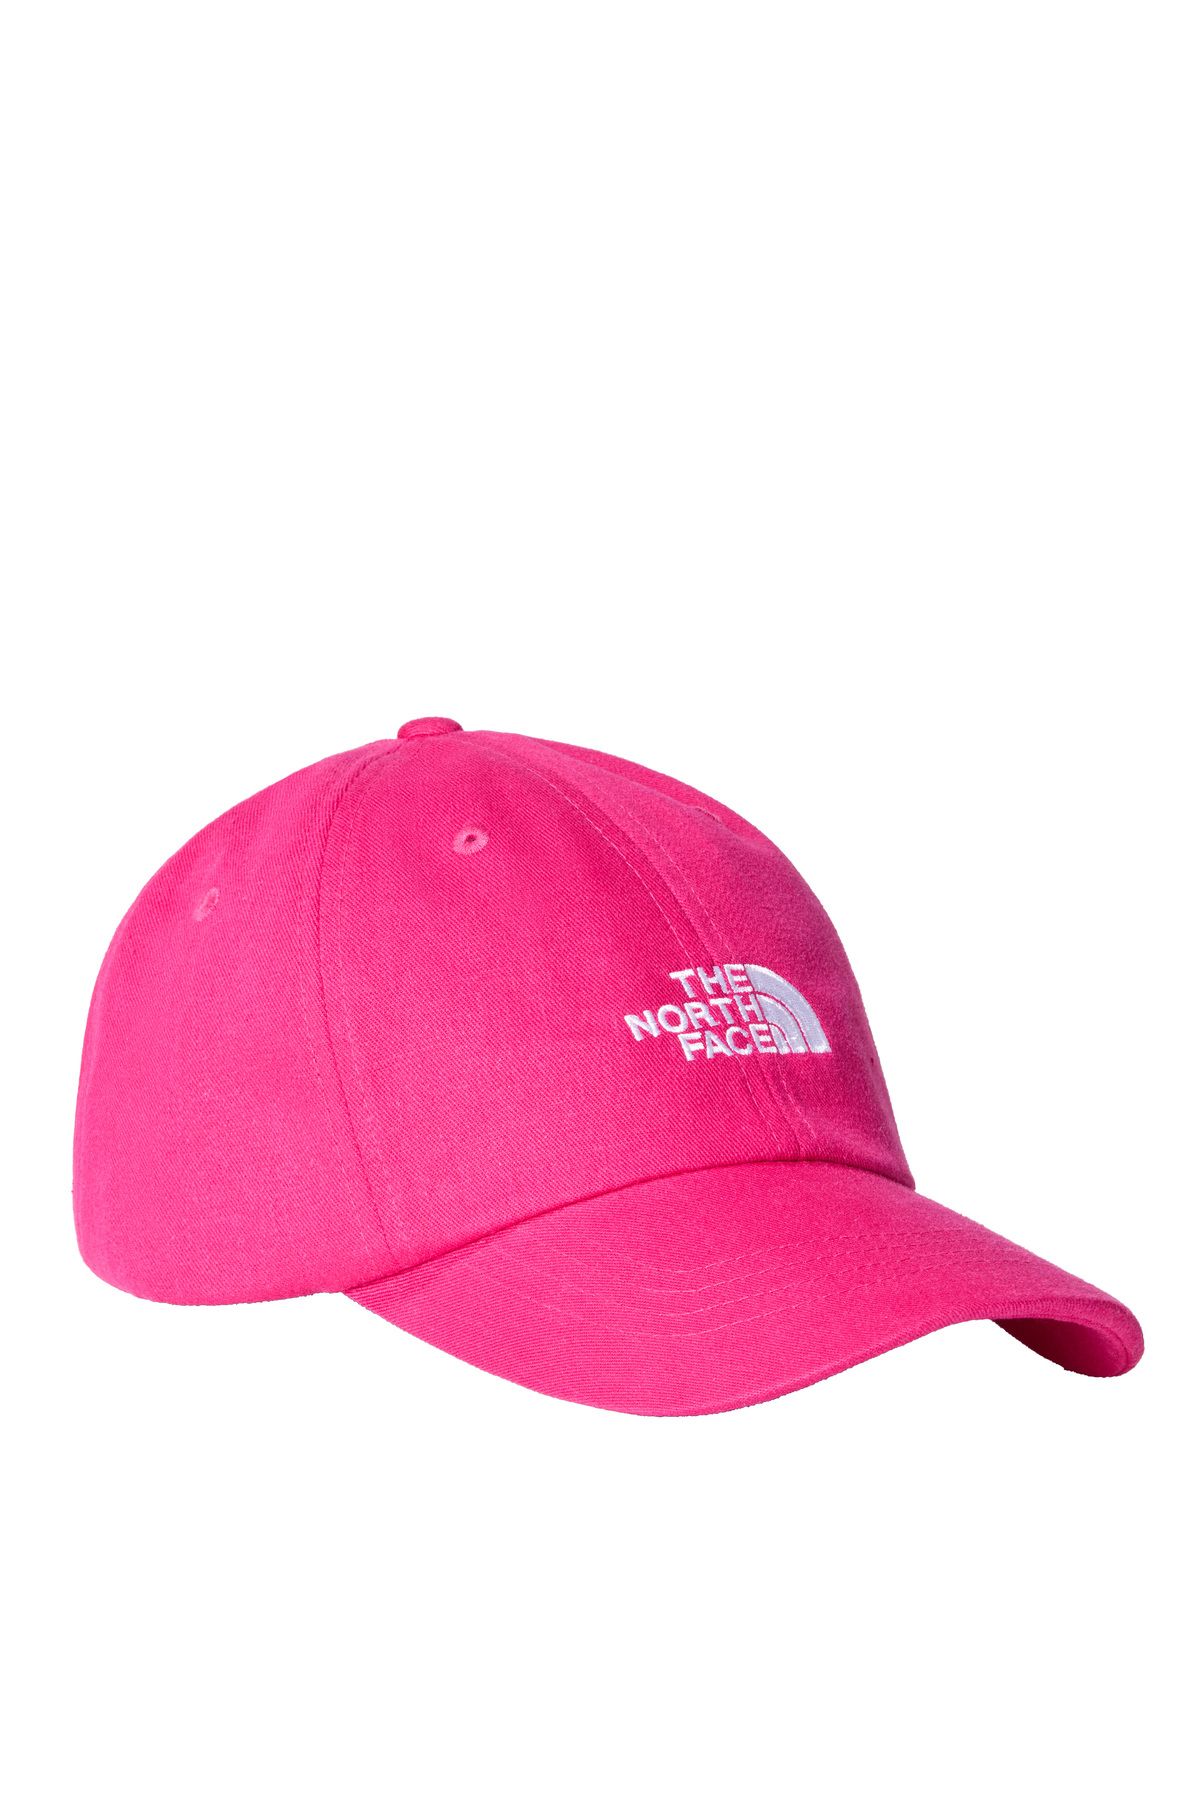 The North Face Norm Pembe Şapka